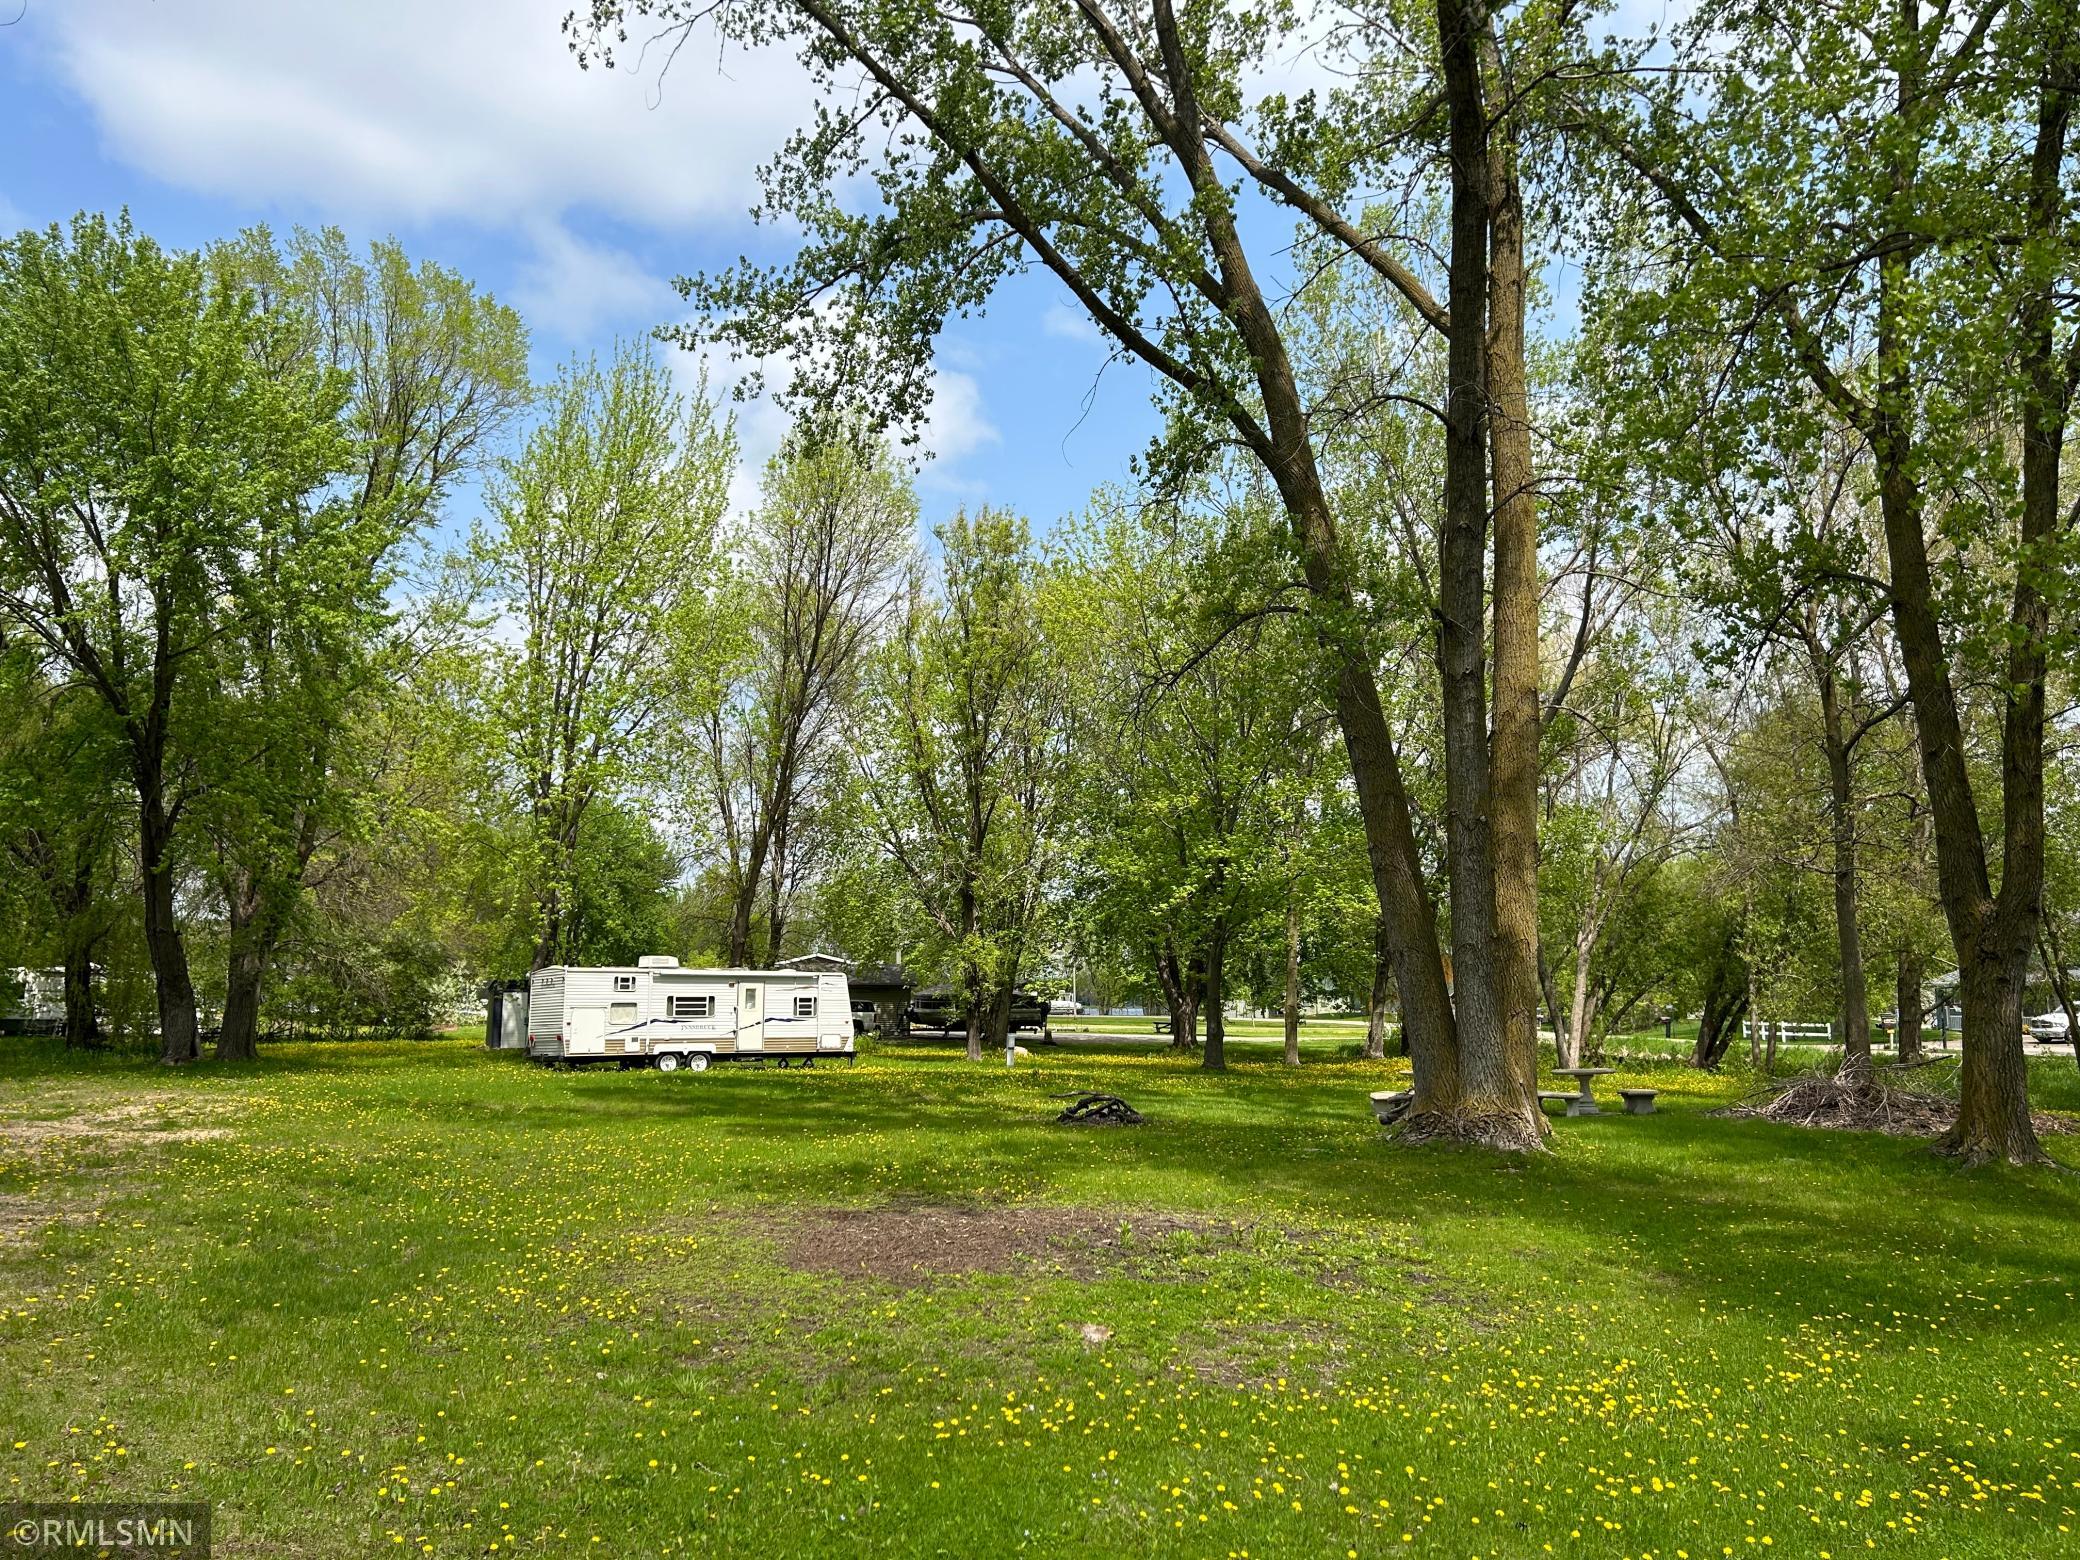 Buildable lot with shared lake access to Two Rivers Lake across the street. Bring your plans for your dream home. Camper not included.